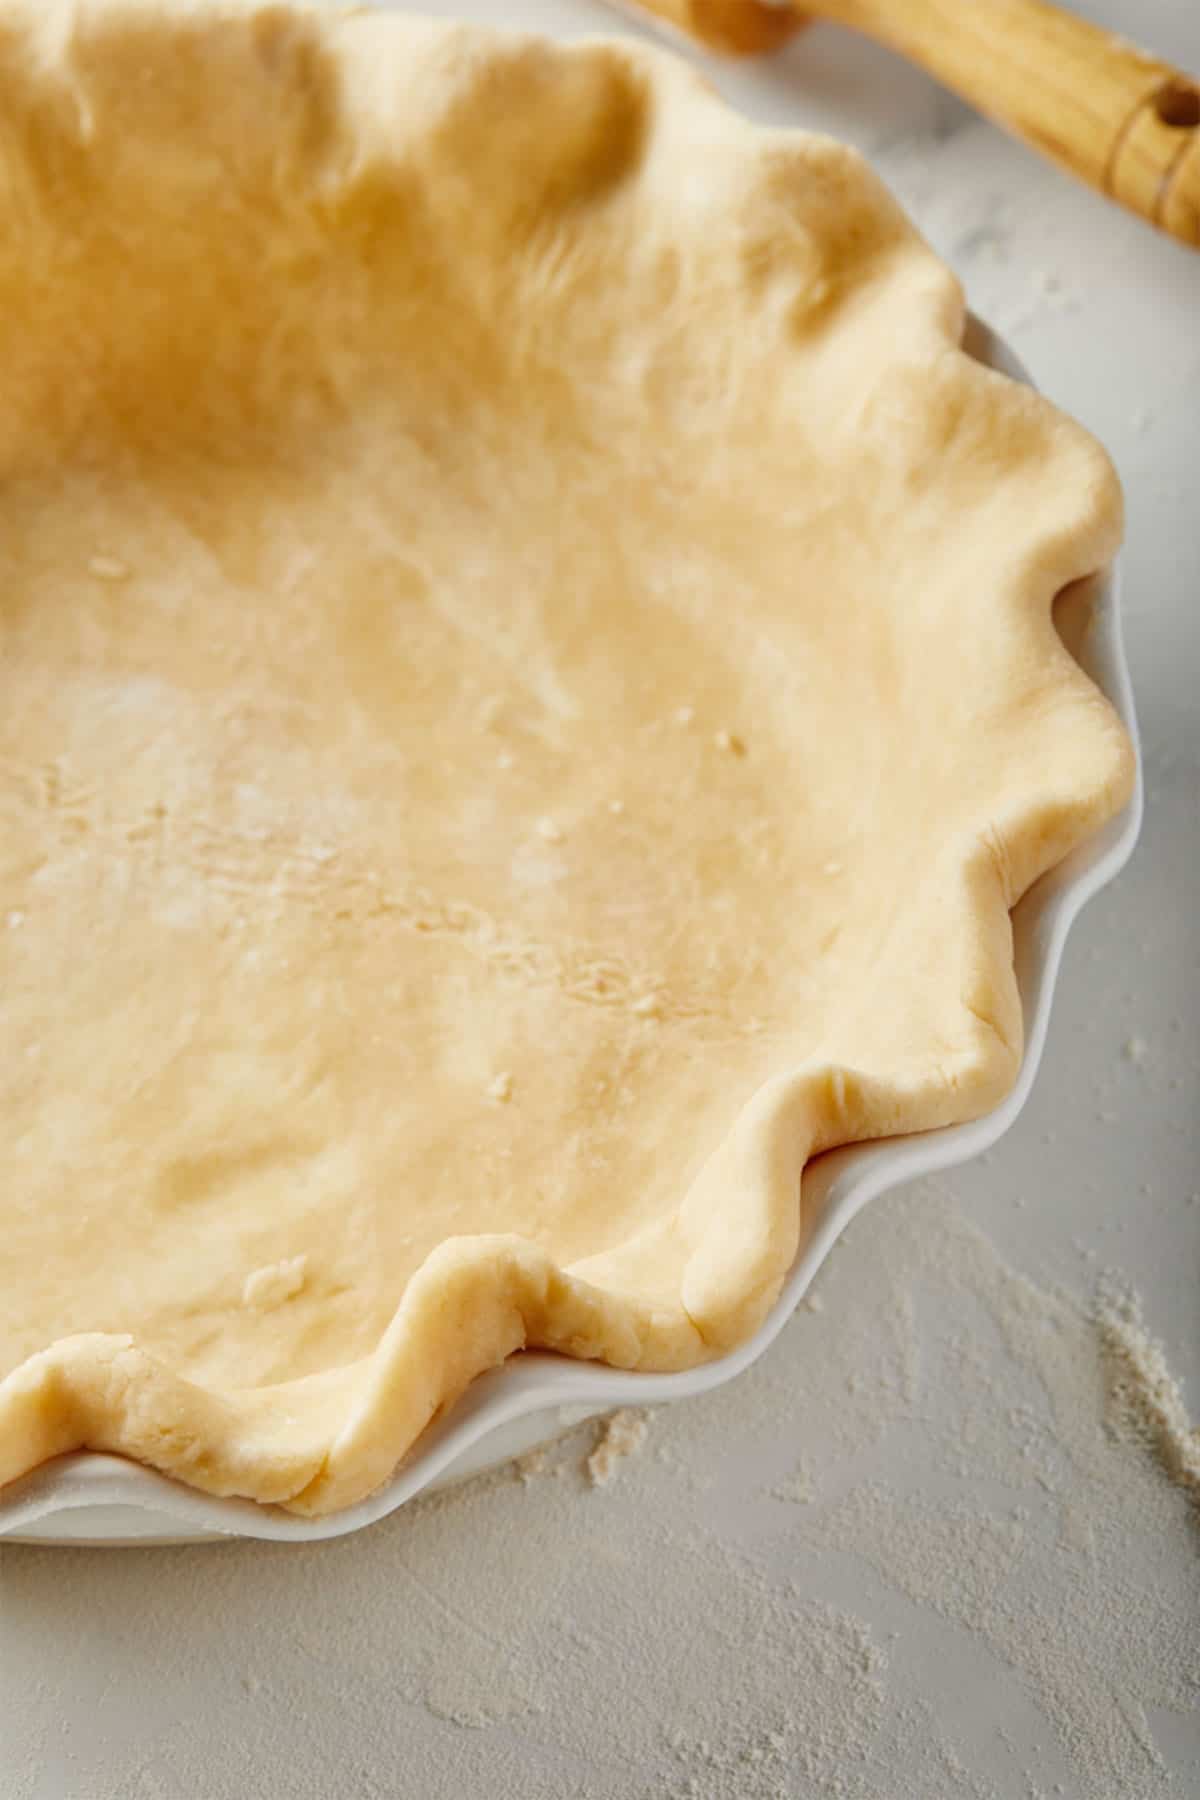 A side view of the best pie crust recipe baked up in a pie plate.